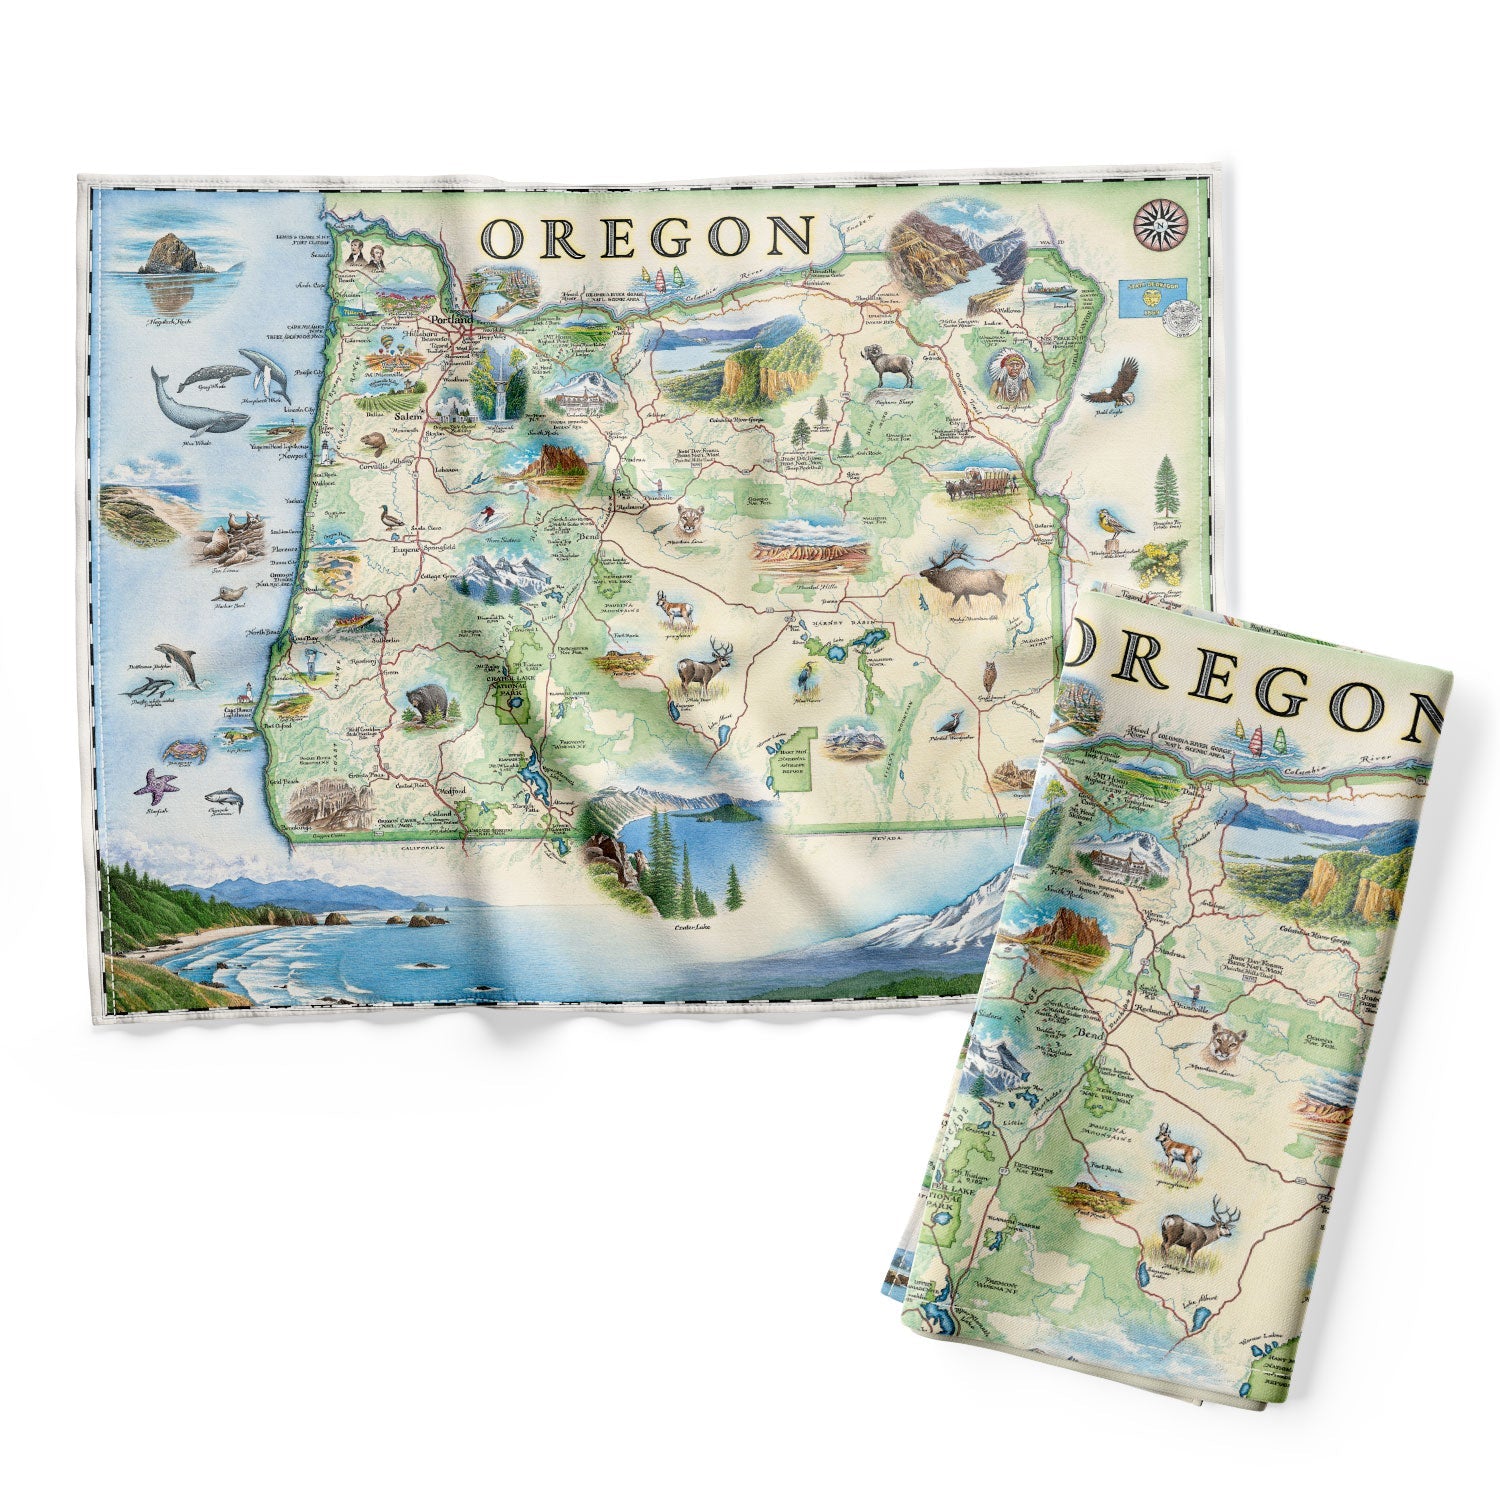 Oregon Kitchen Dishwashing Towel in earth tones of greens and blues. Features illustrations such as Hells Canyon Snake River, the Columbia River Gorge, Multnomah Falls, and Crater Lake. Flora and fauna include the blue whale, big horn sheep, Dungeness crab, Oregon grape, and Douglas Fir. 